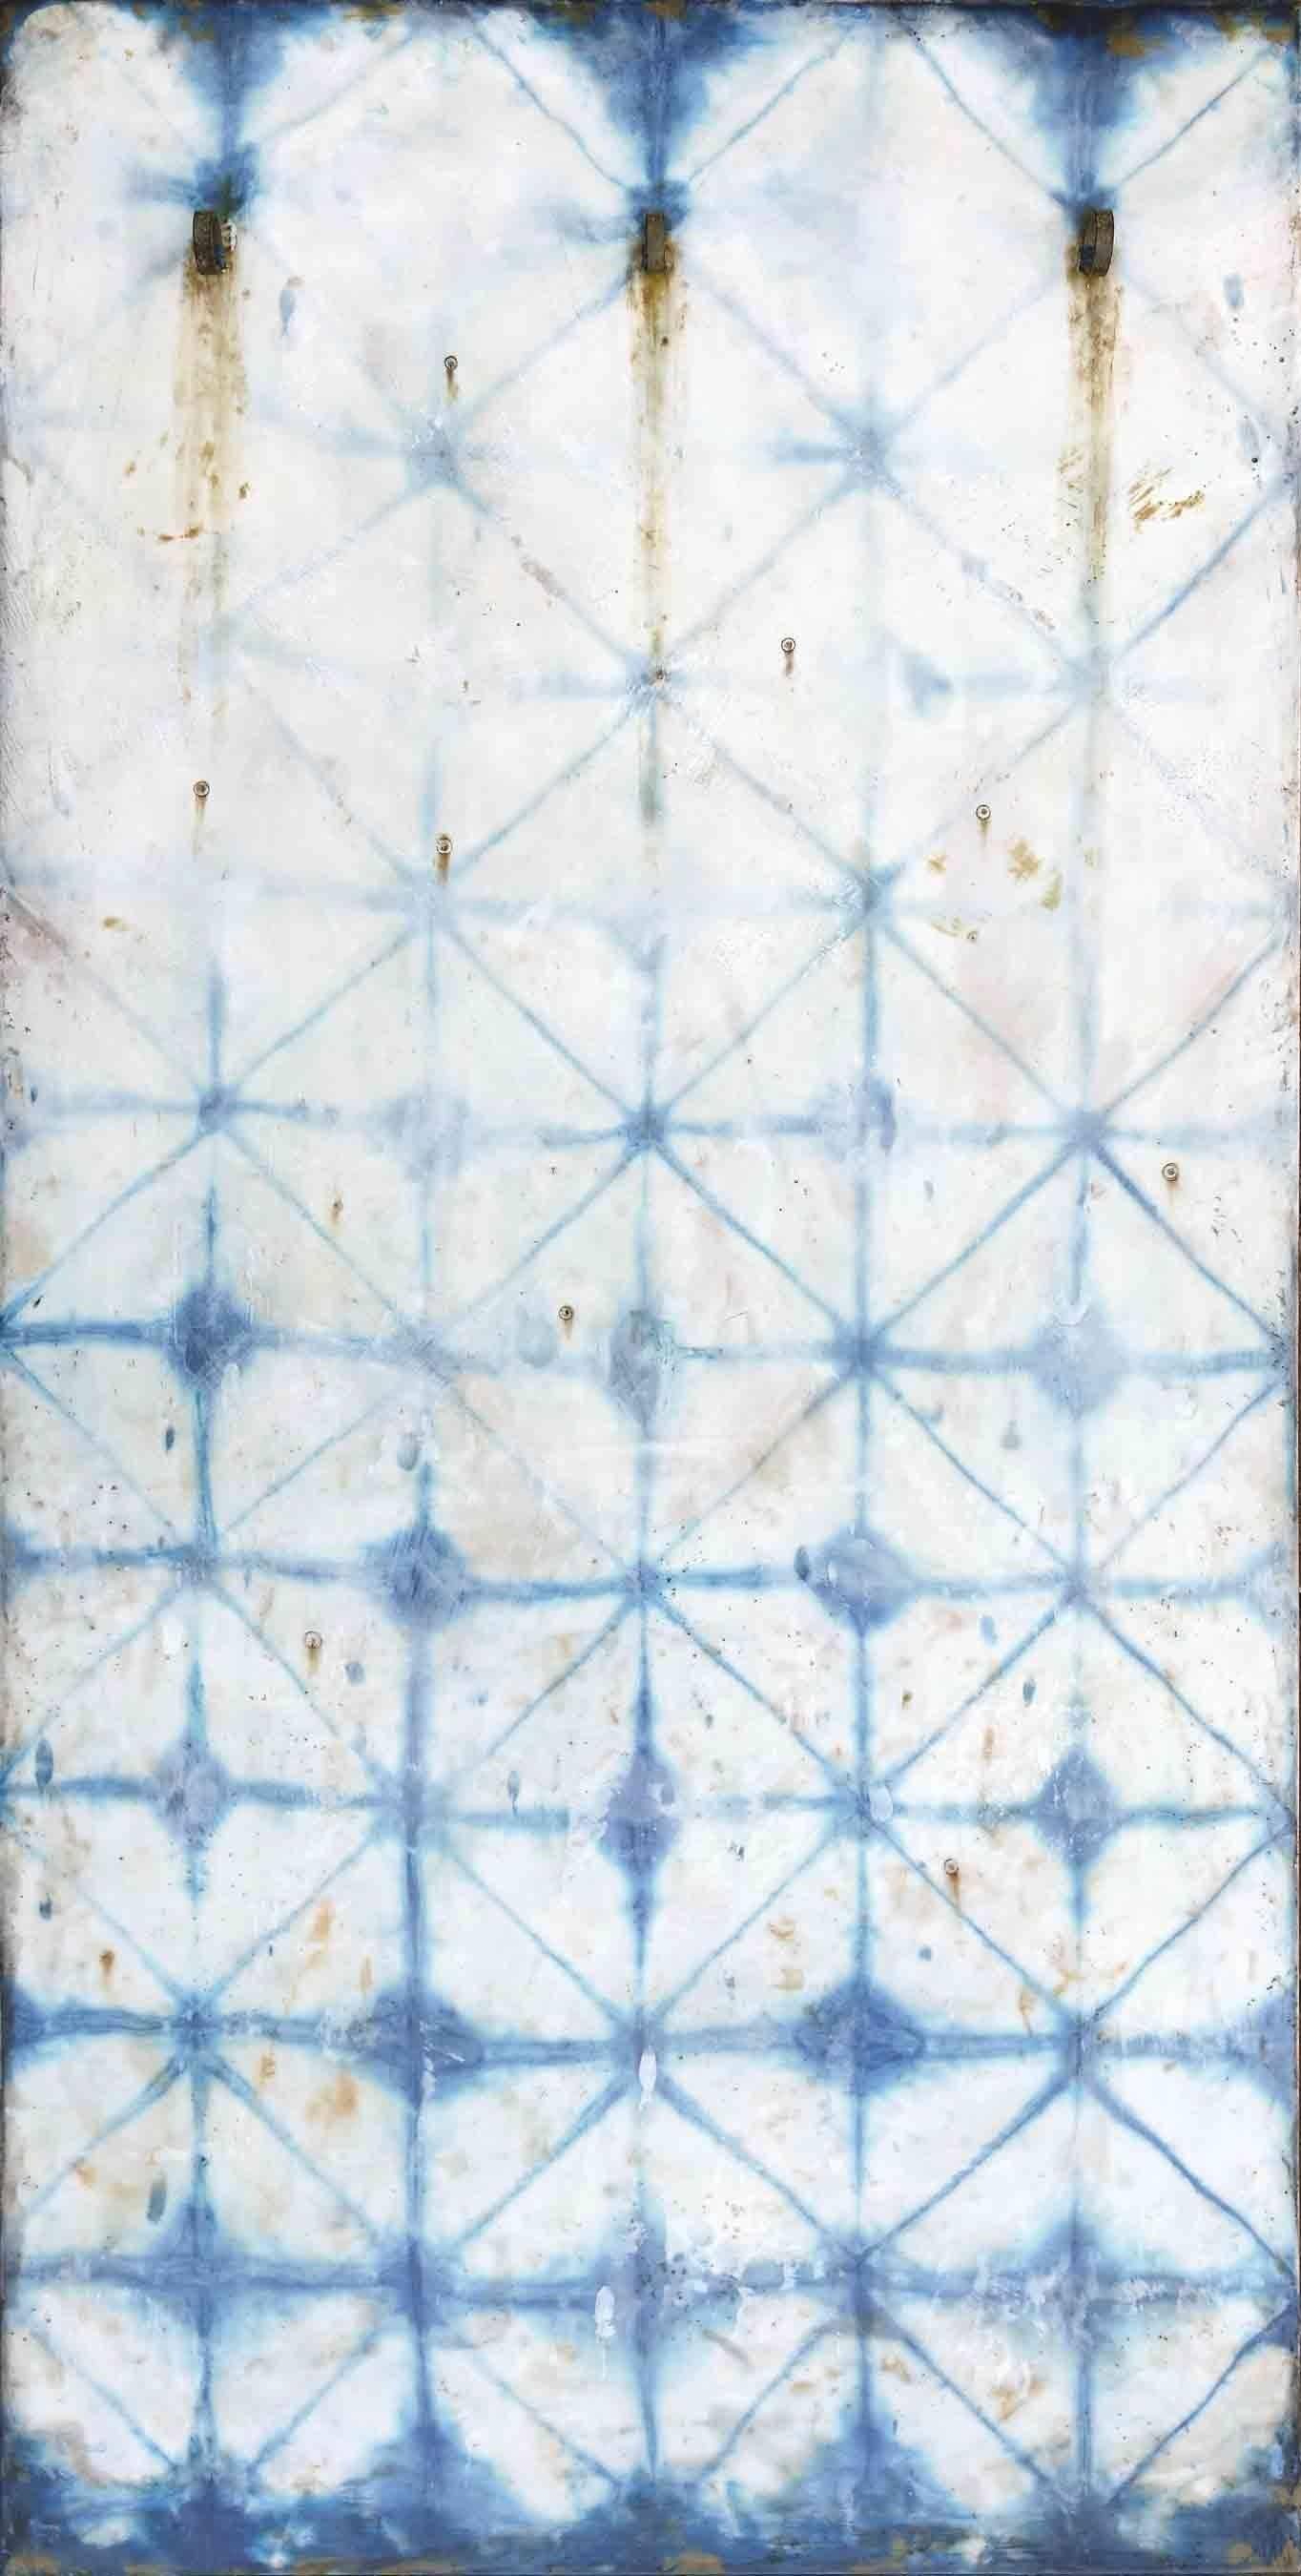 Susan Stover Abstract Painting - Chance Fades (Modern Abstract Blue Indigo & Encaustic Vertical Work on Panel)